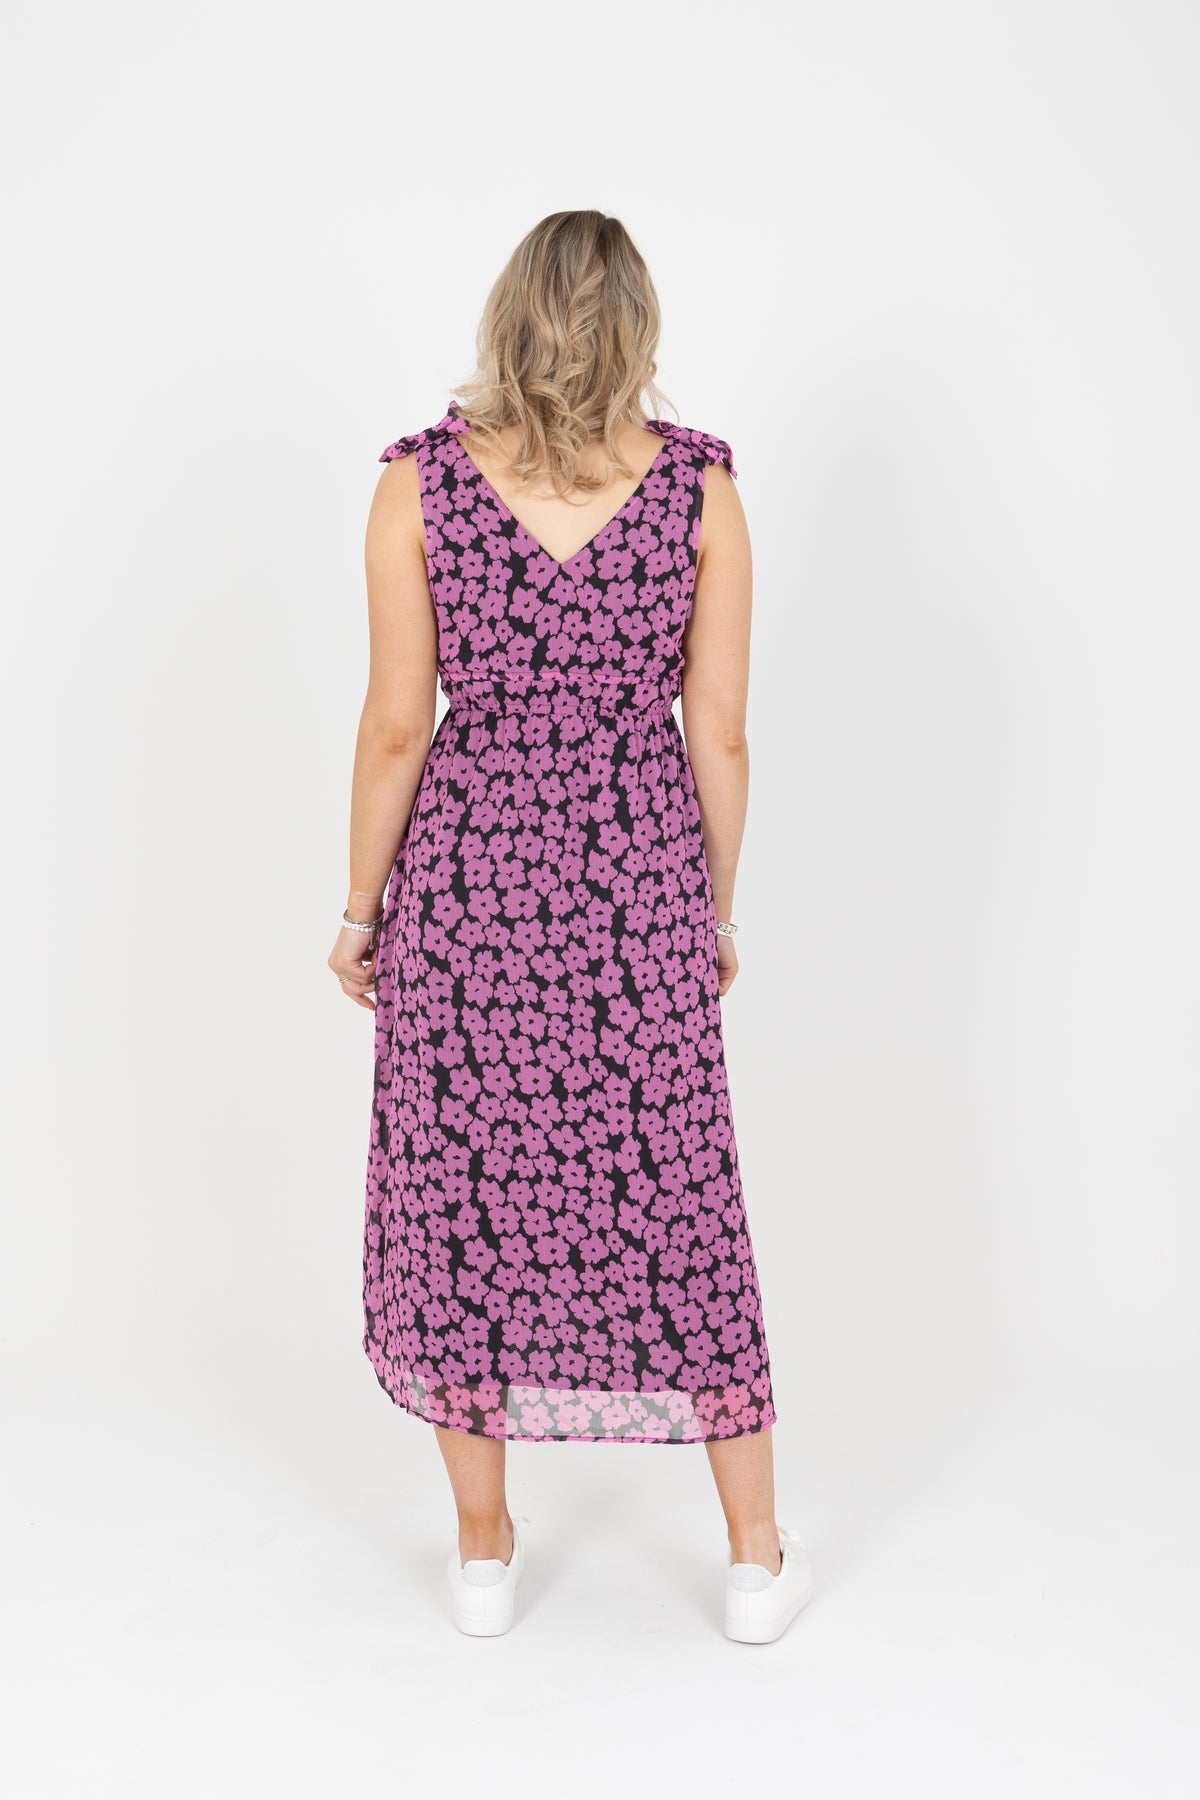 Sierra Maxi Dress Rose Shadow - EXCLUSIVE TO MINT